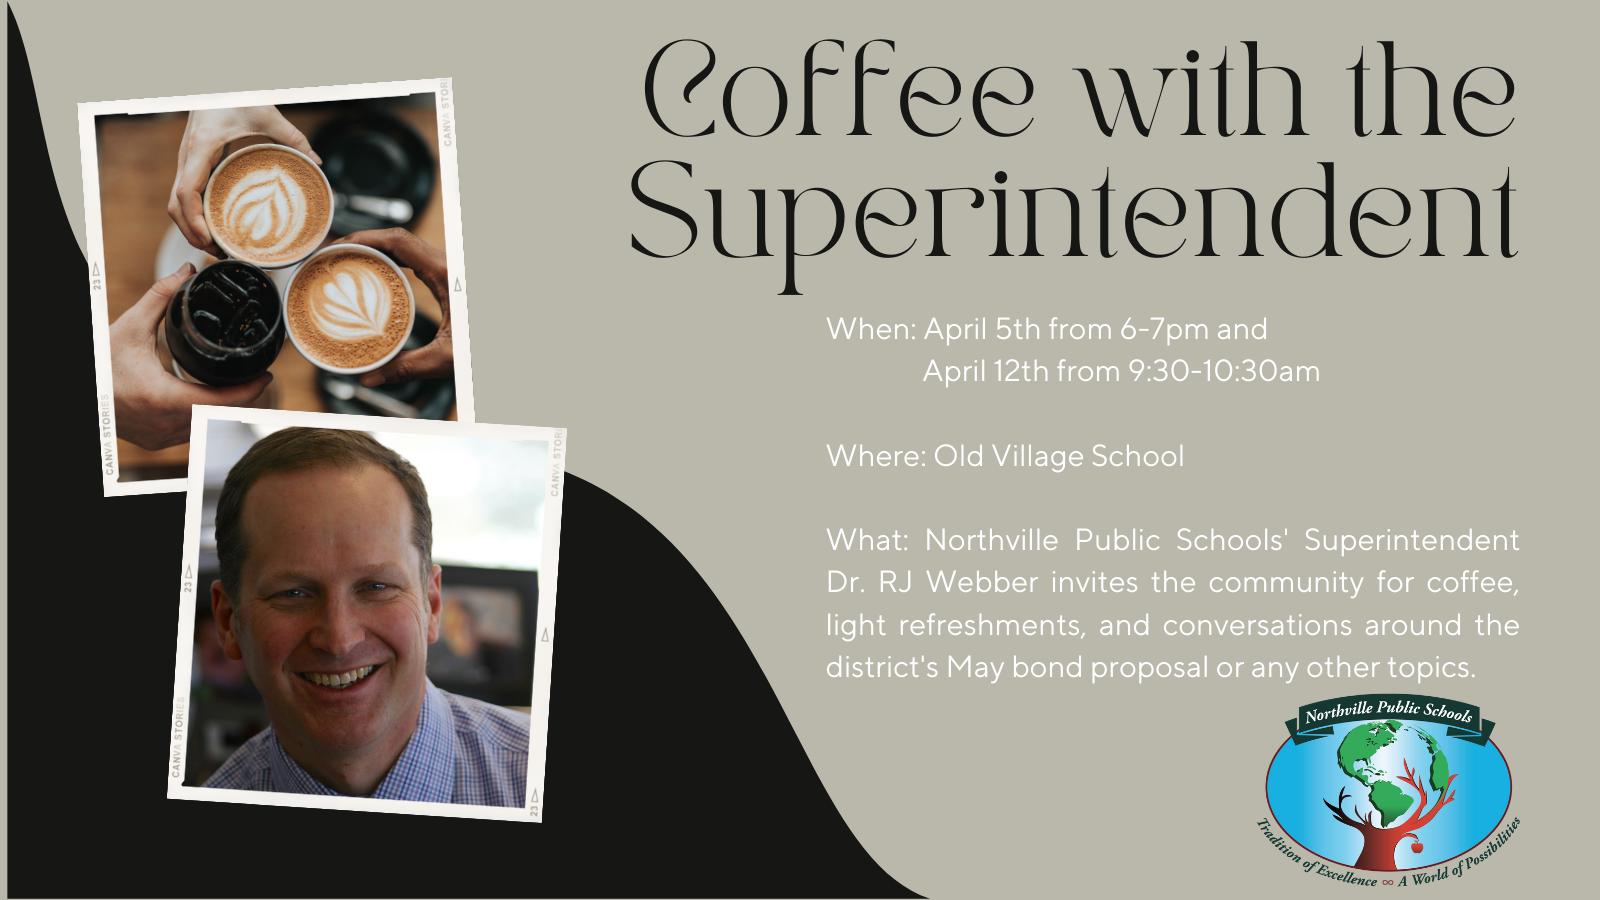 Coffee with the Superintendent When: April 5th from 6-7pm and April 12th from 9:30-10:30am Where: Old Village School What: Northville Public Schools' Superintendent Dr. RJ Webber invites the community for coffee, light refreshments, and conversations around the district's May bond proposal or any other topics.